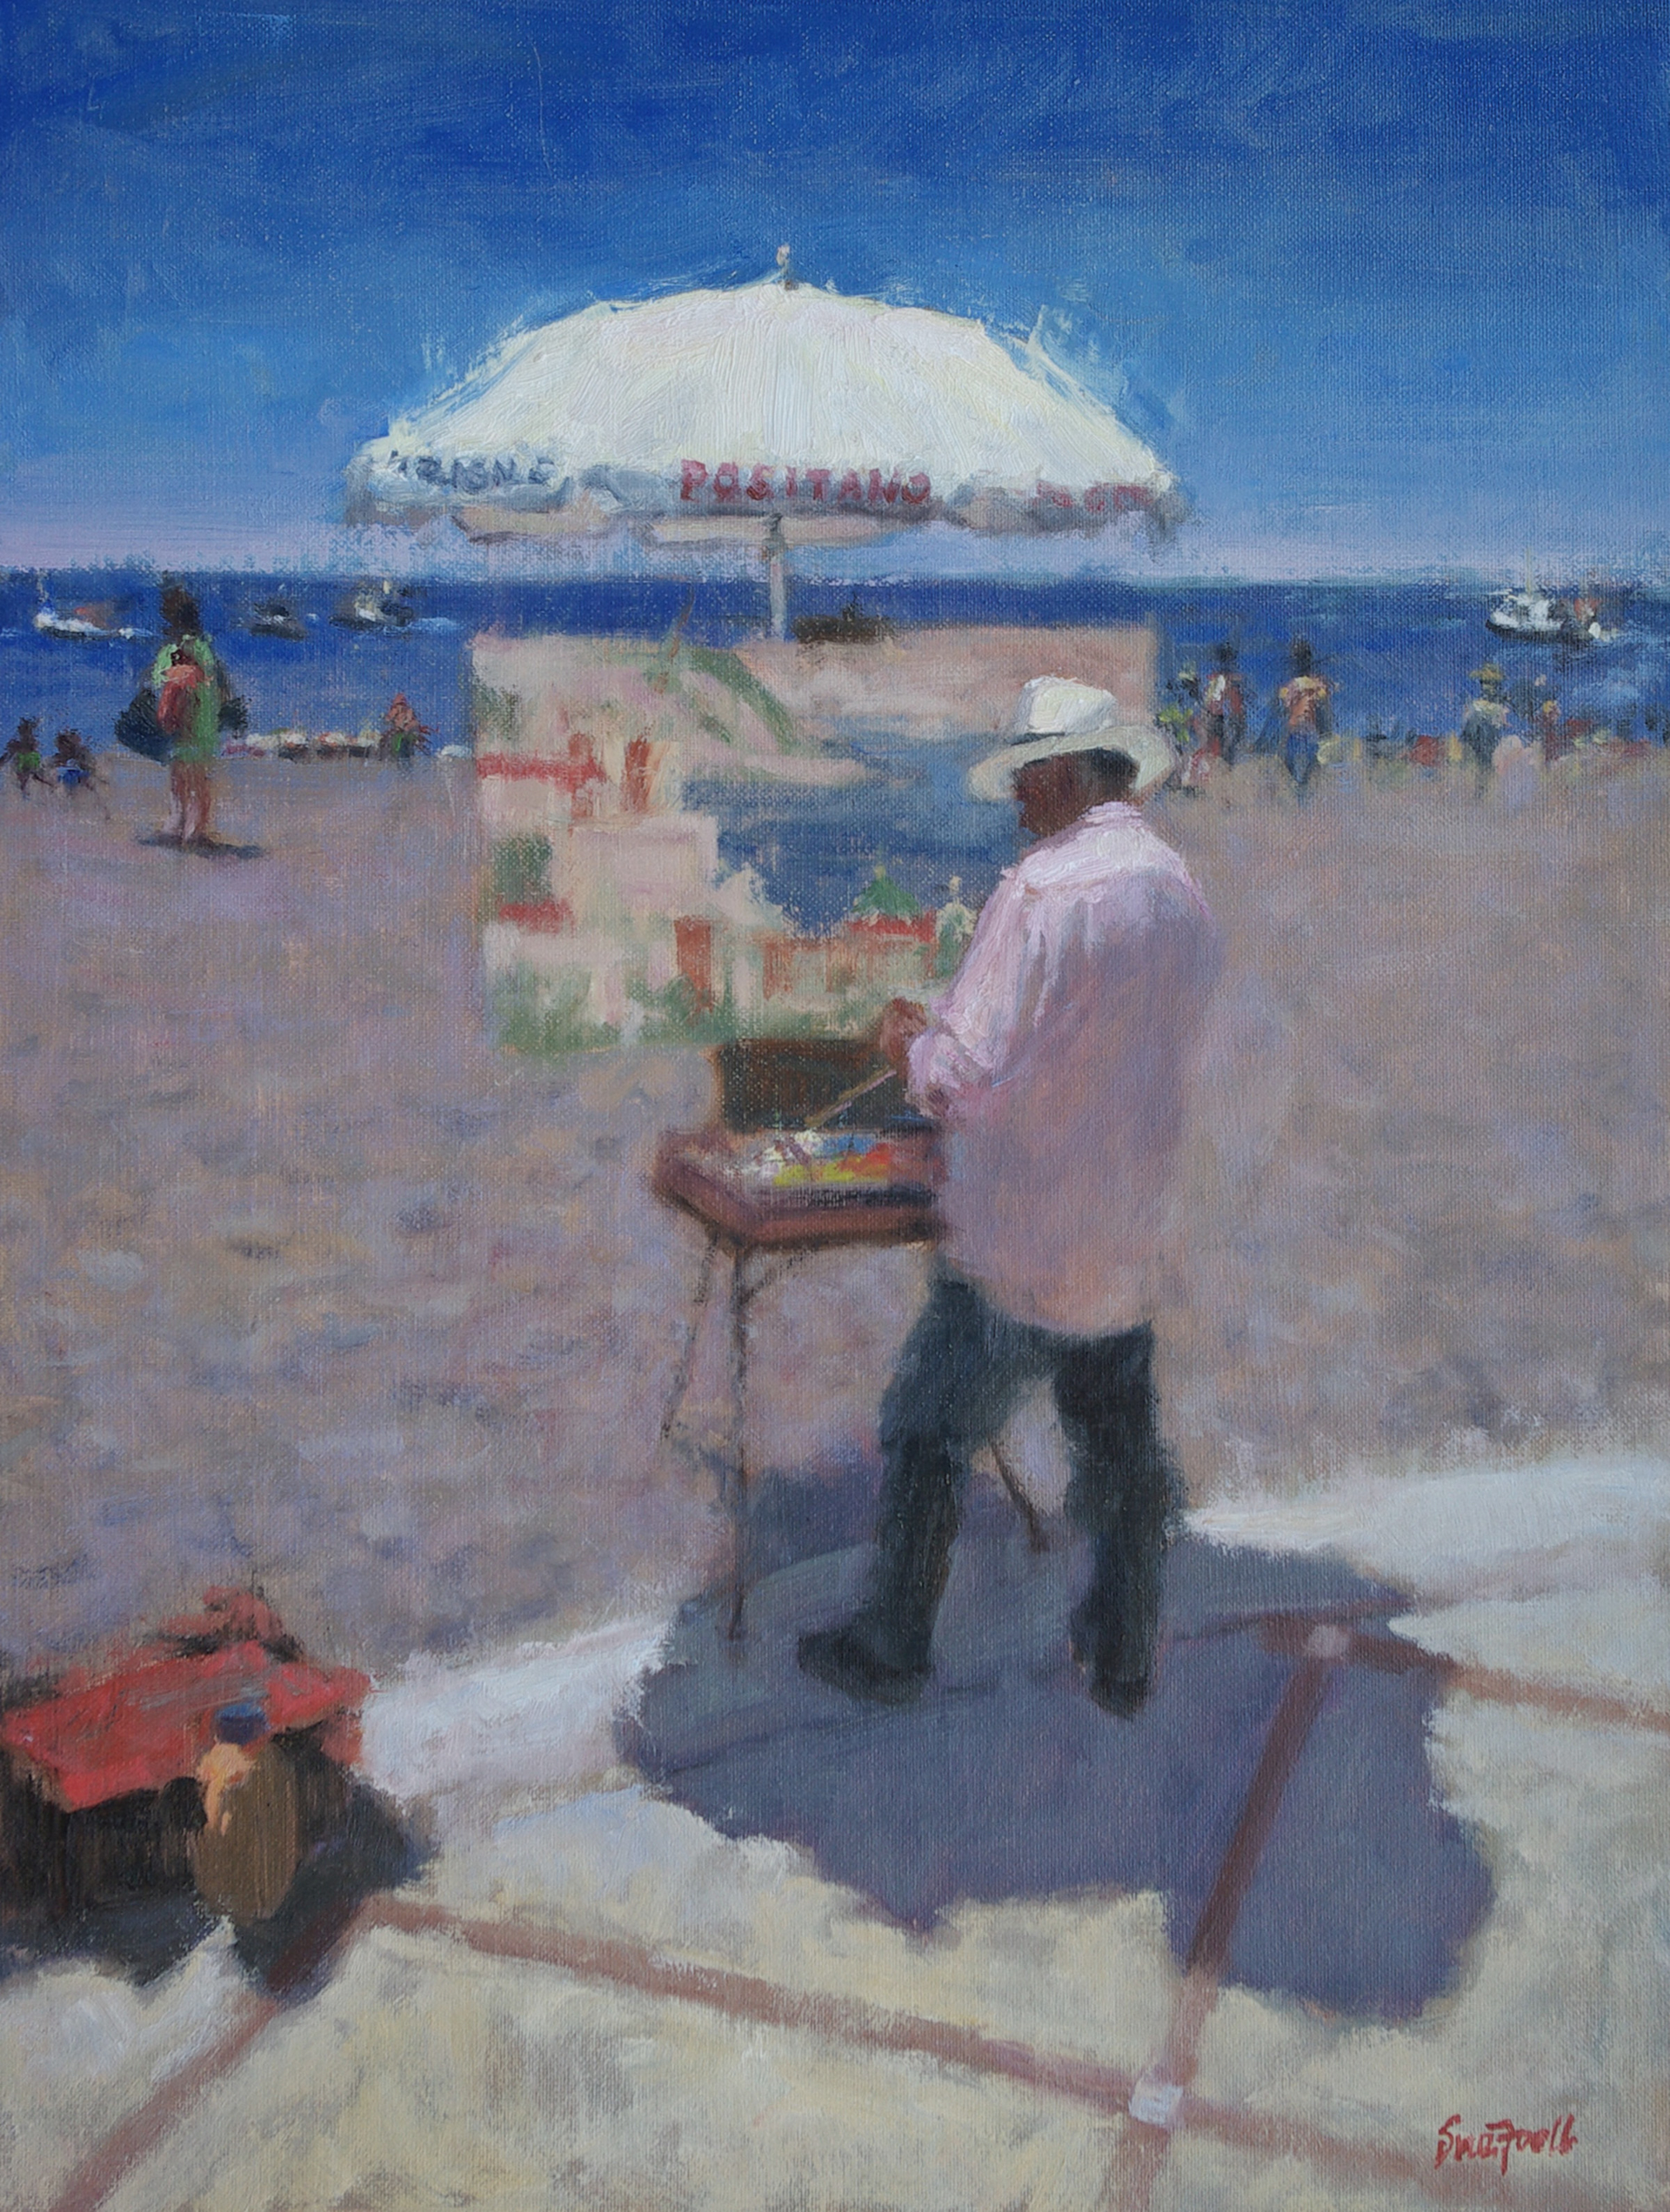 Positano Painter by Sue Foell, opa